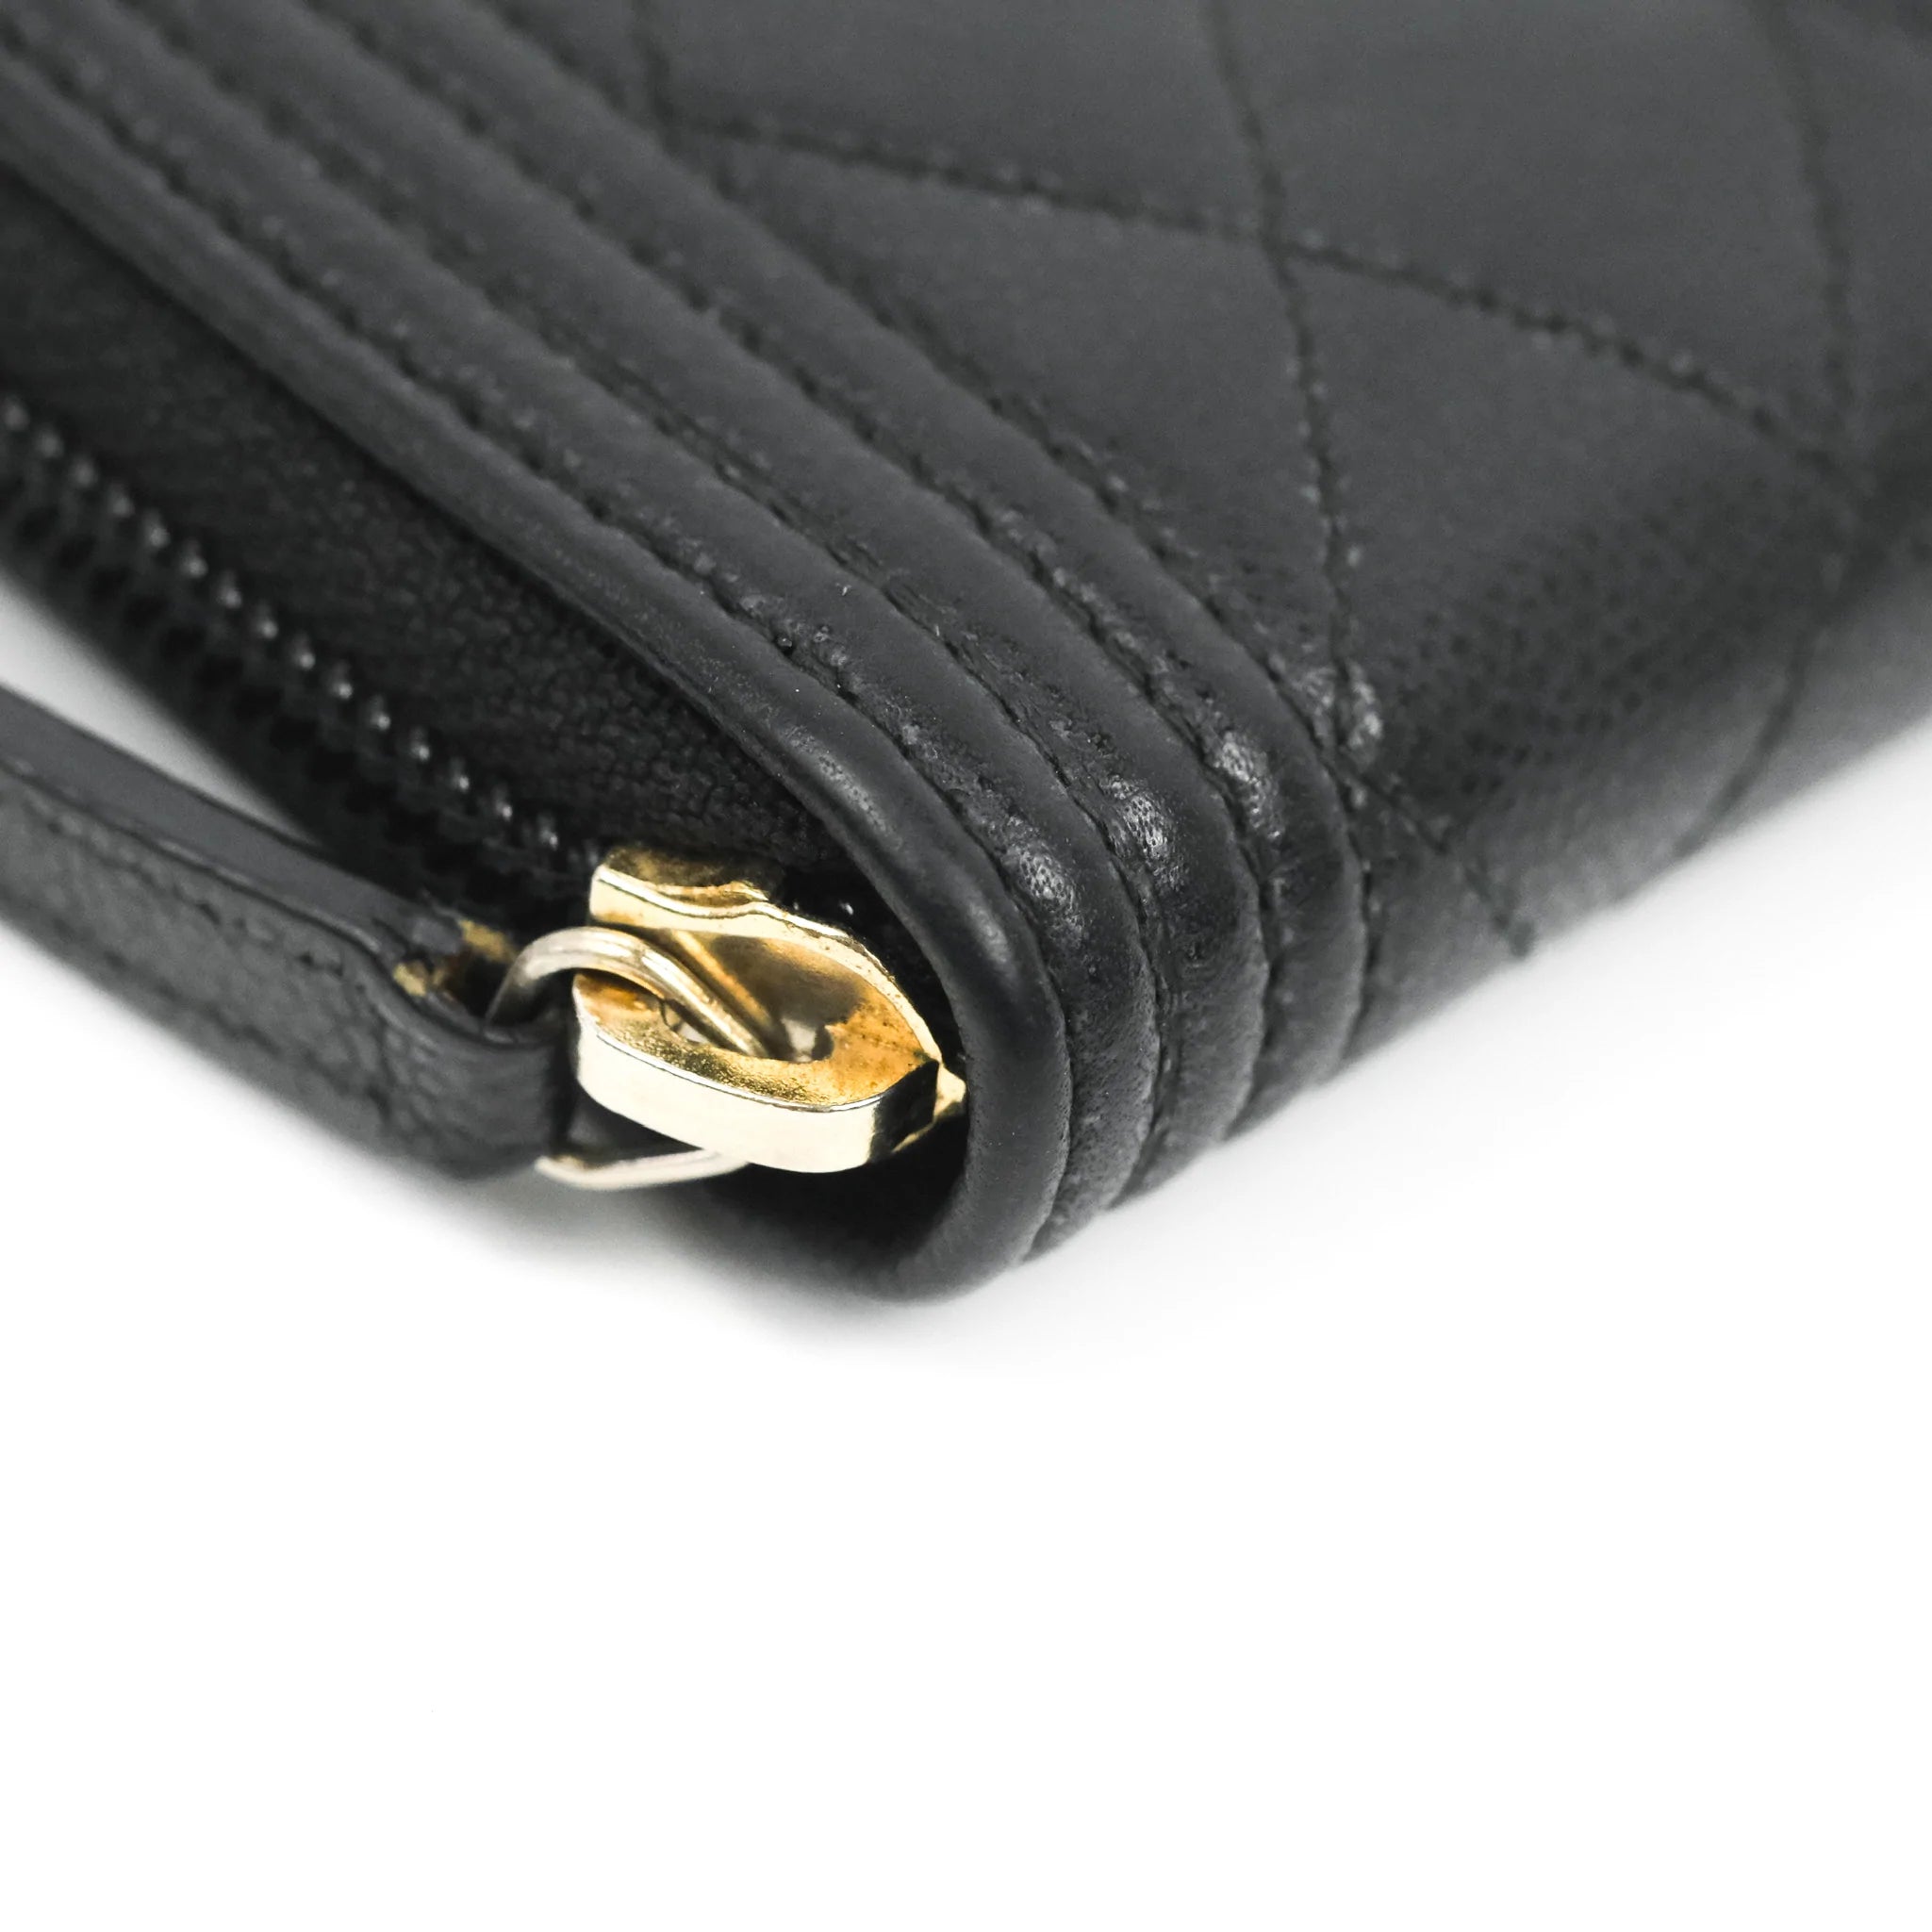 Naughtipidgins Nest - Chanel Classic Zipped Coin Purse in Black Caviar with  Shiny Gold Hardware. RRP £430 The classically styled, super practical, zip-around  compact purse, ideal Cards and Coins and just the